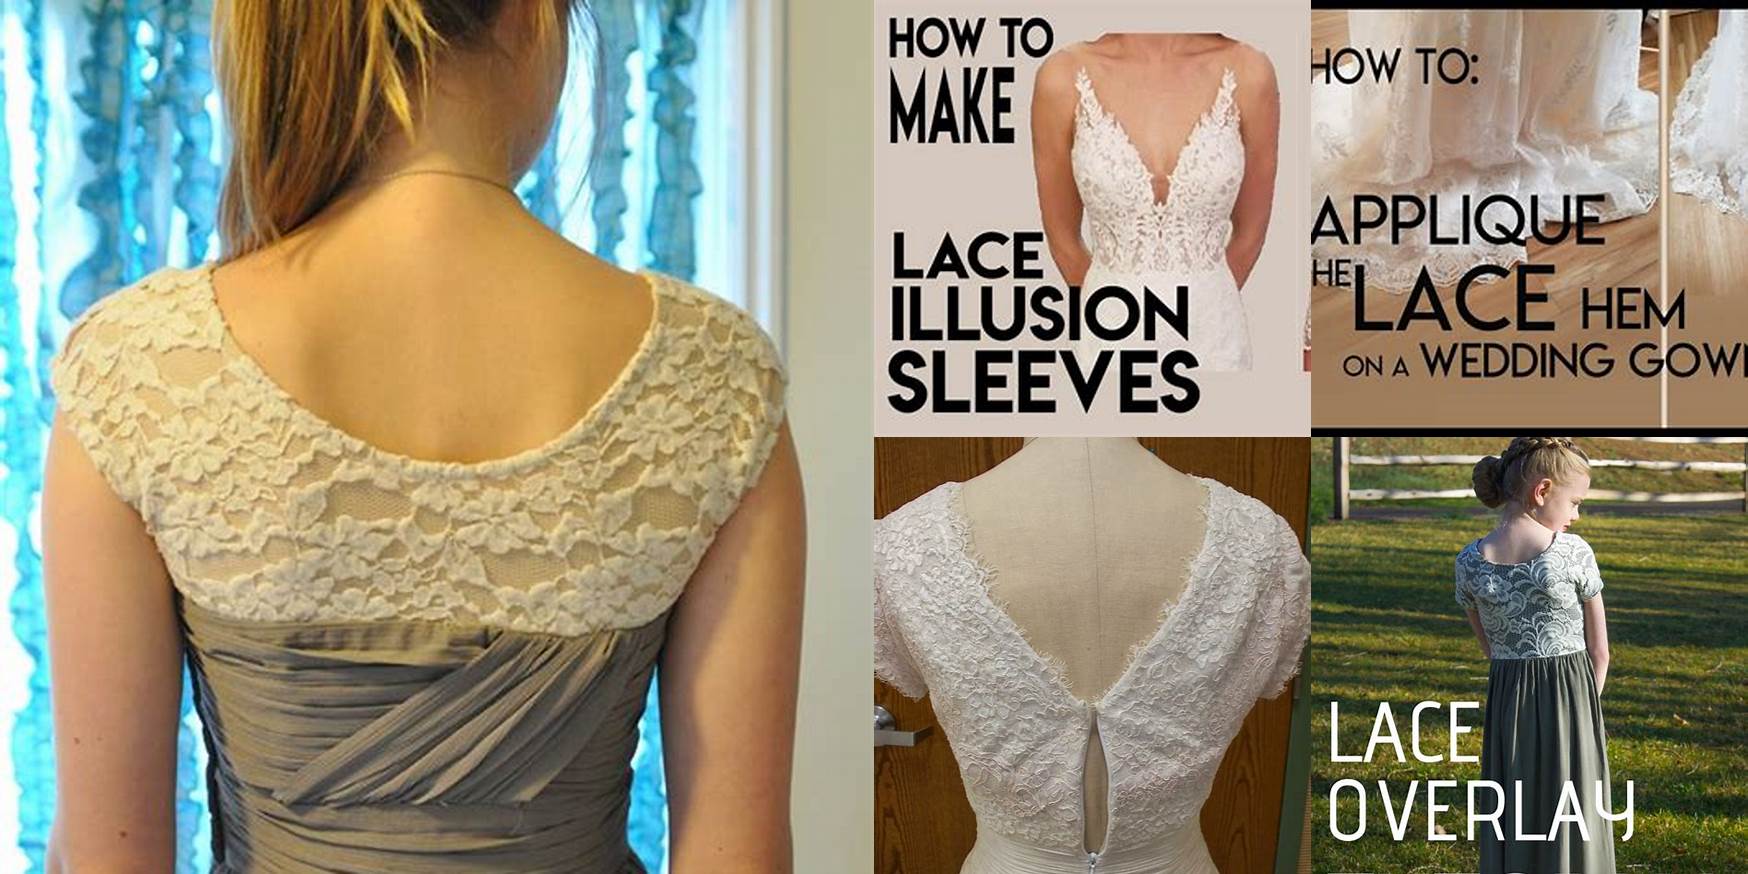 How To Add Lace To A Dress